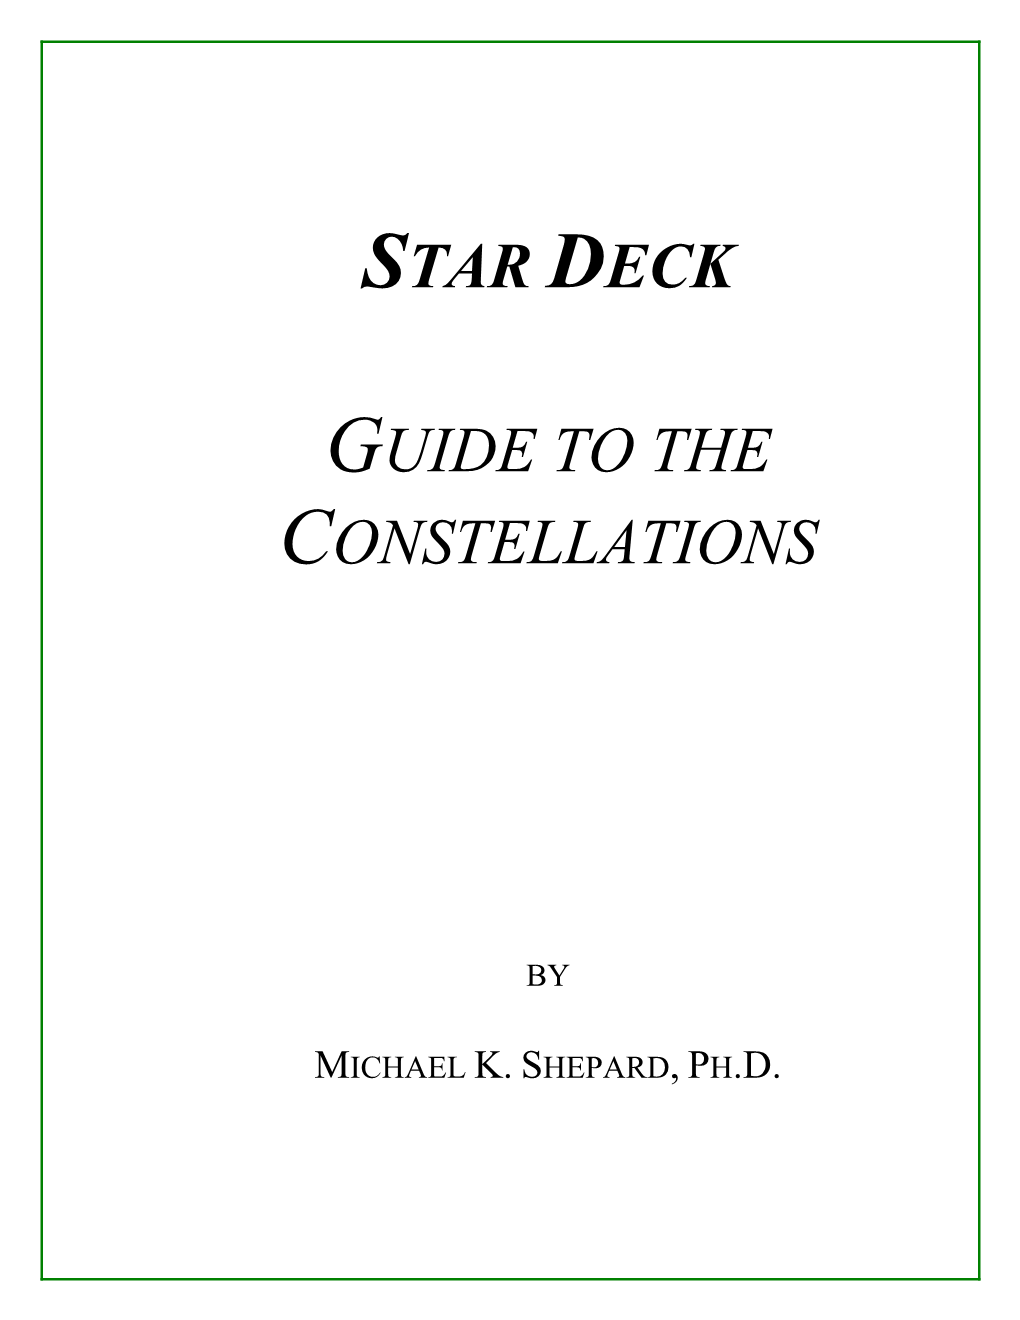 Guide to the Constellations